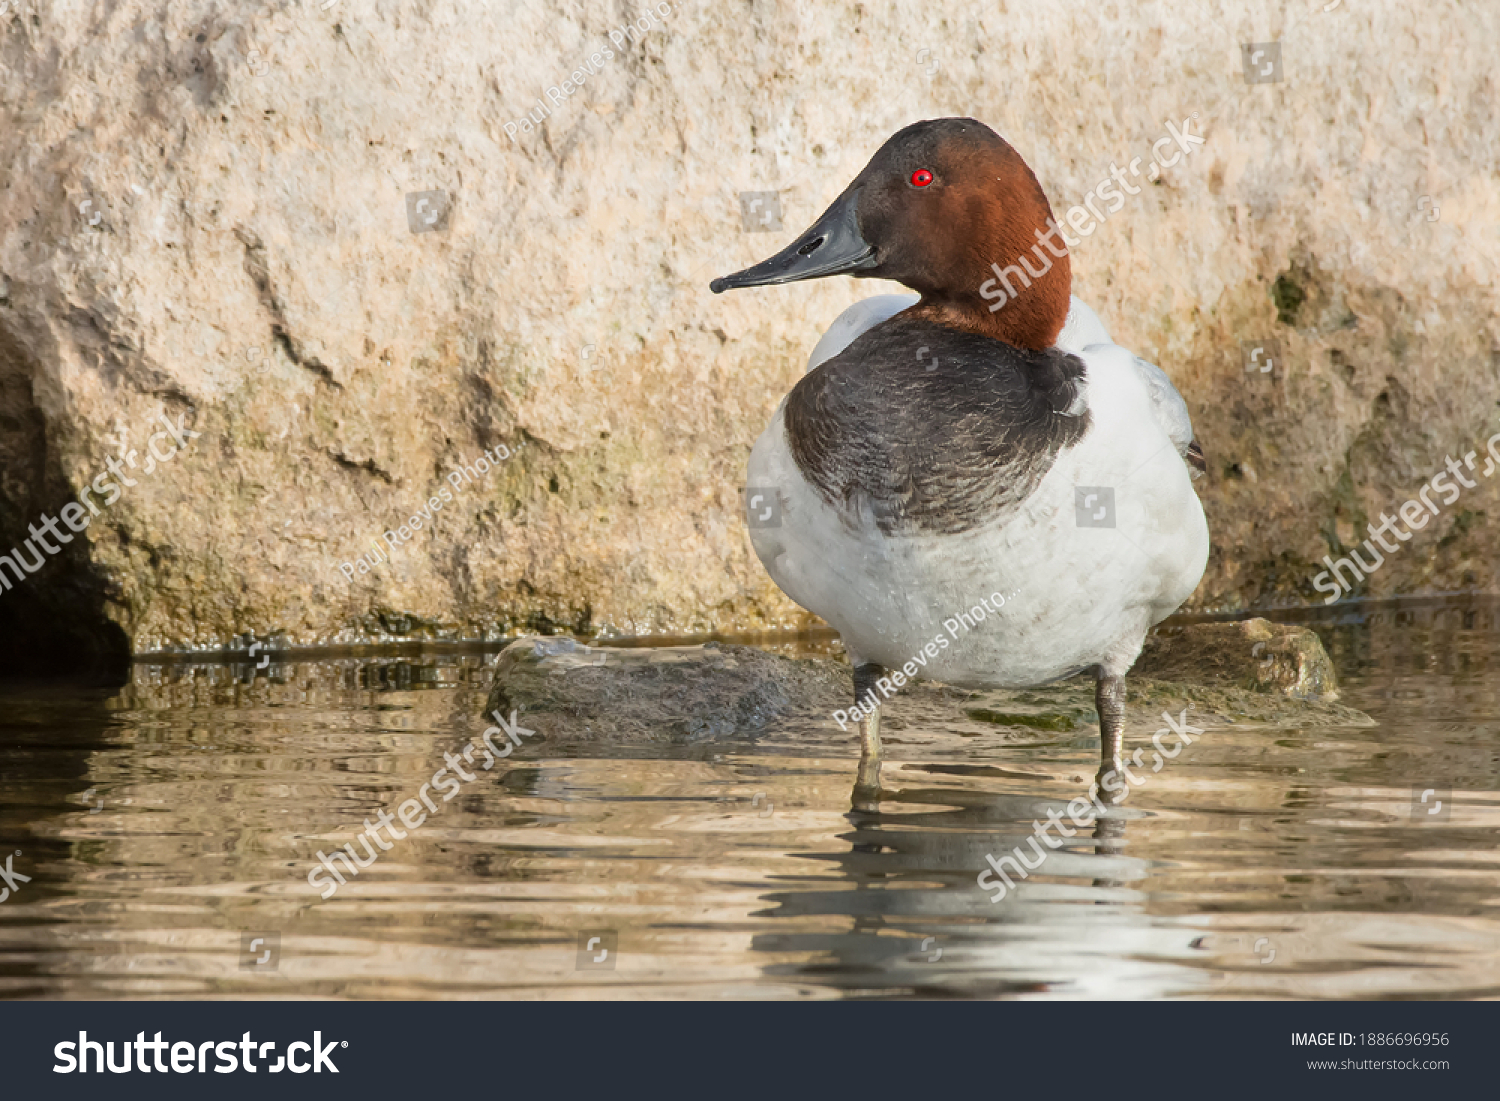 A male Canvasback is standing in the shallow water at the edge of a stone wall. Colonel Samuel Smith Park, Toronto, Ontario, Canada. #1886696956